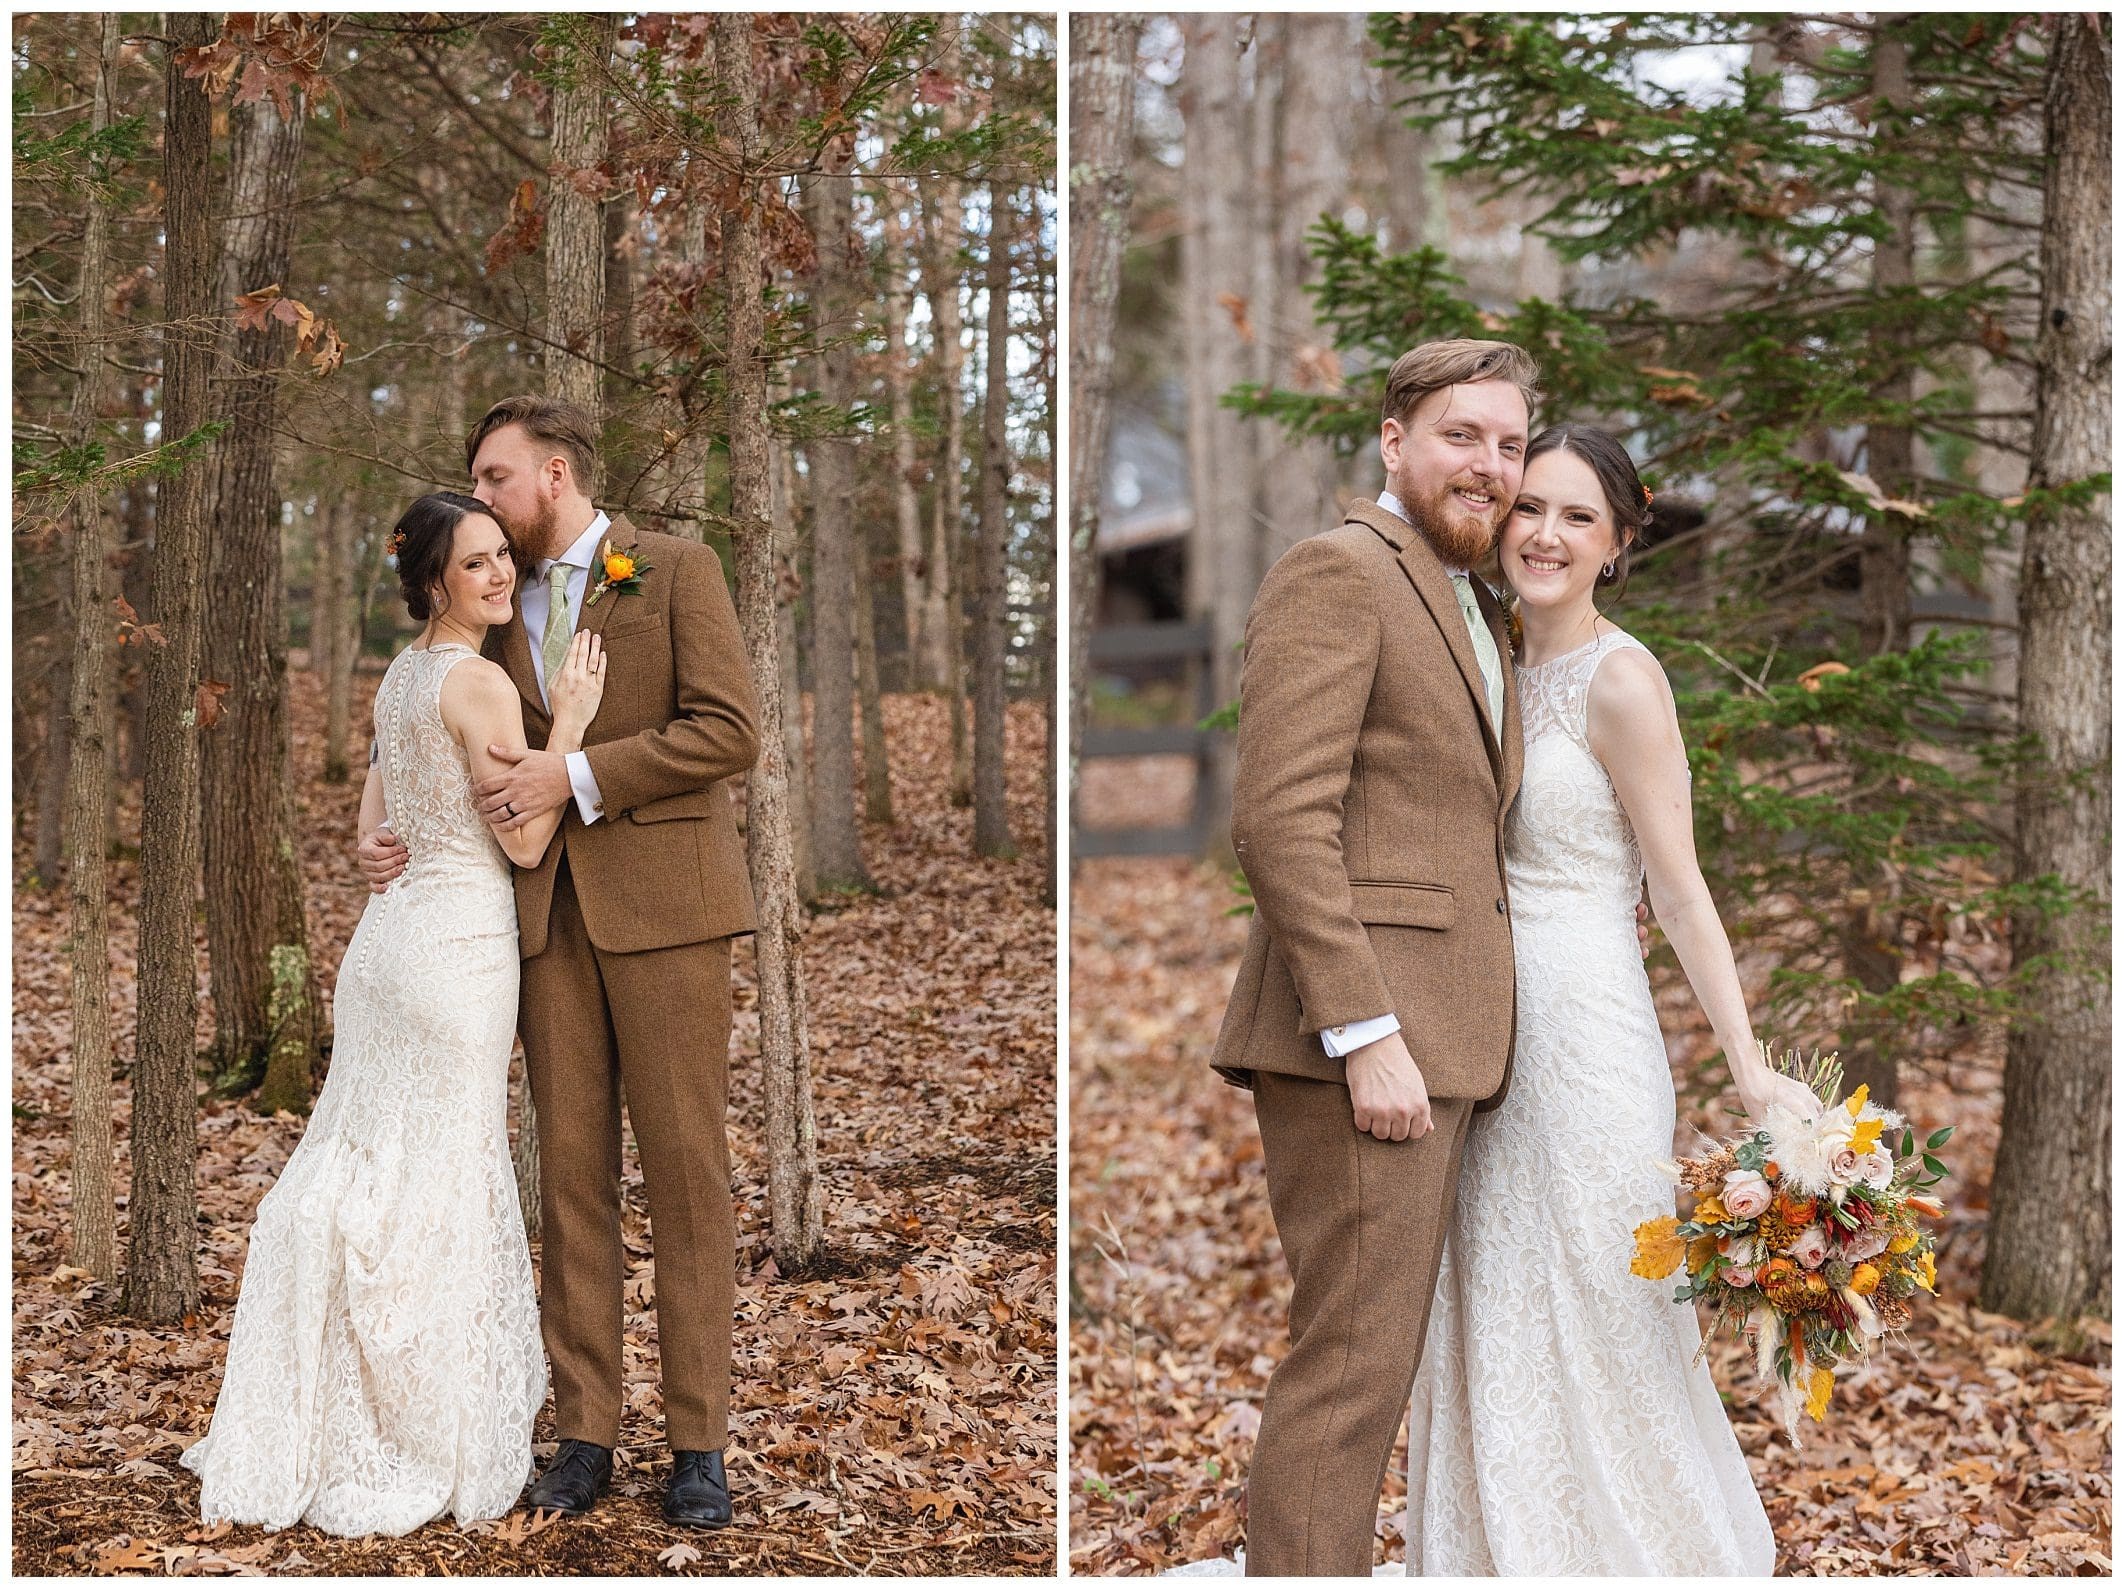 bride and groom photos for their organic fall wedding surrounded by pine trees and a floor of fall leaves